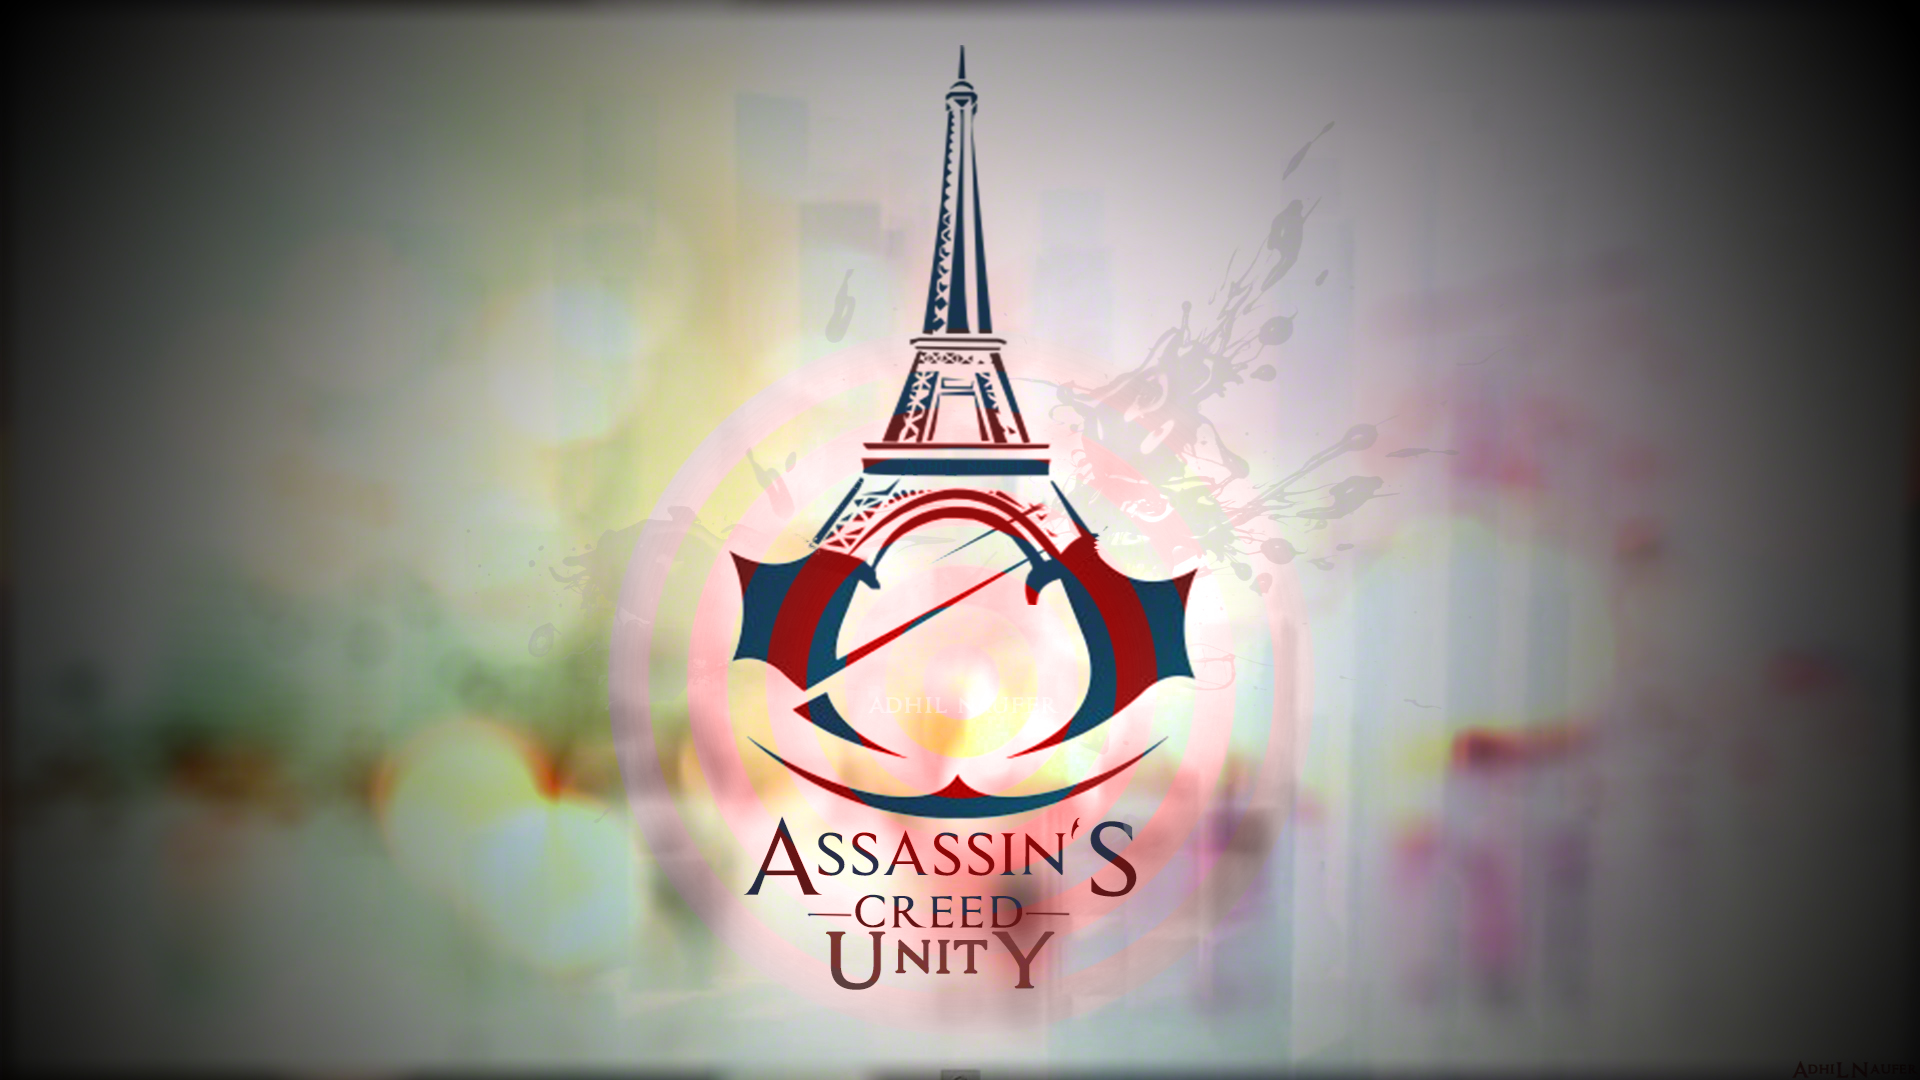 assassin's creed, video game, assassin's creed: unity wallpaper for mobile